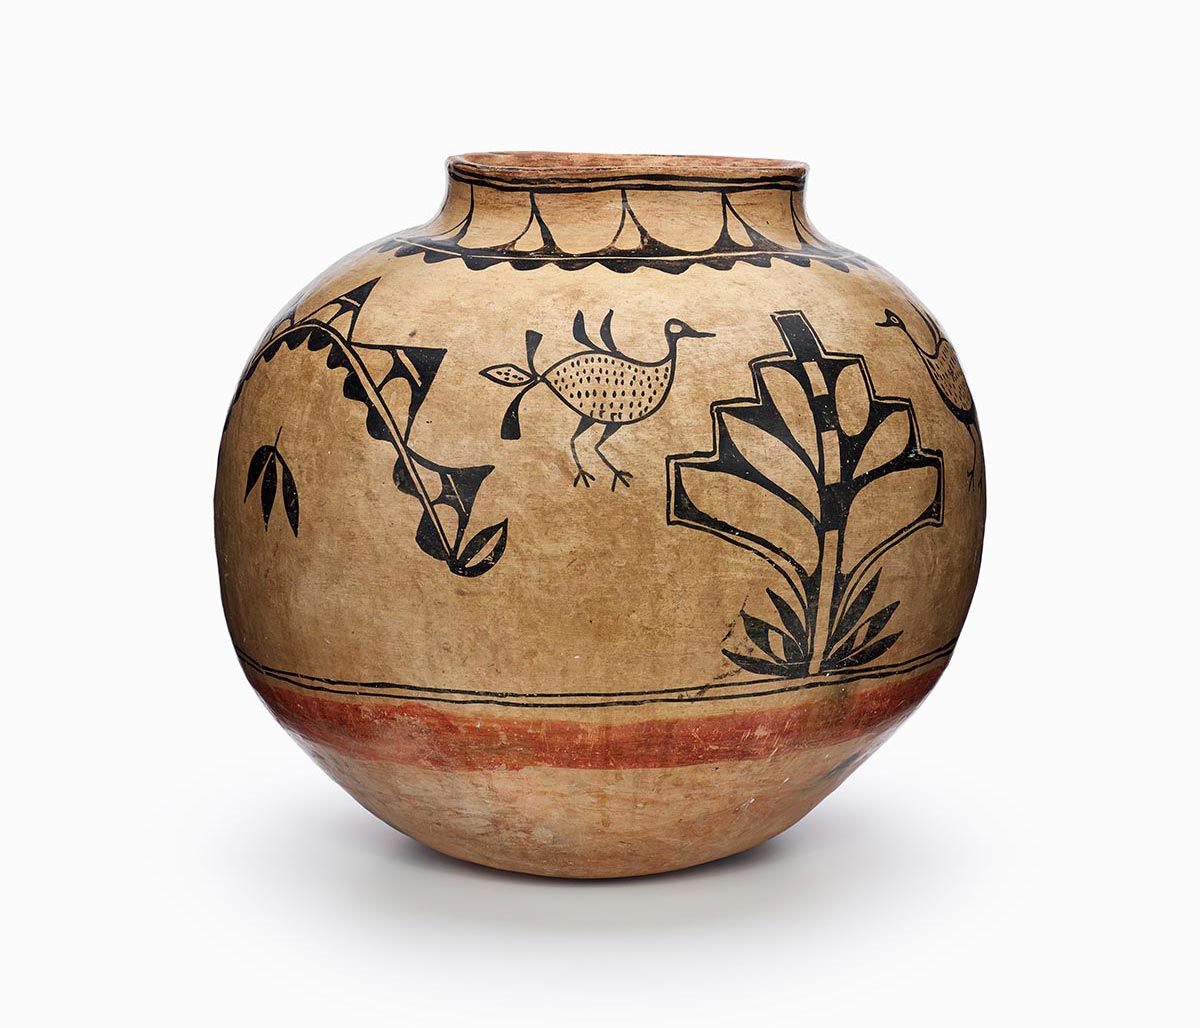 A brown Cochiti jar painted with a black design including leaves, a plant, and four birds.